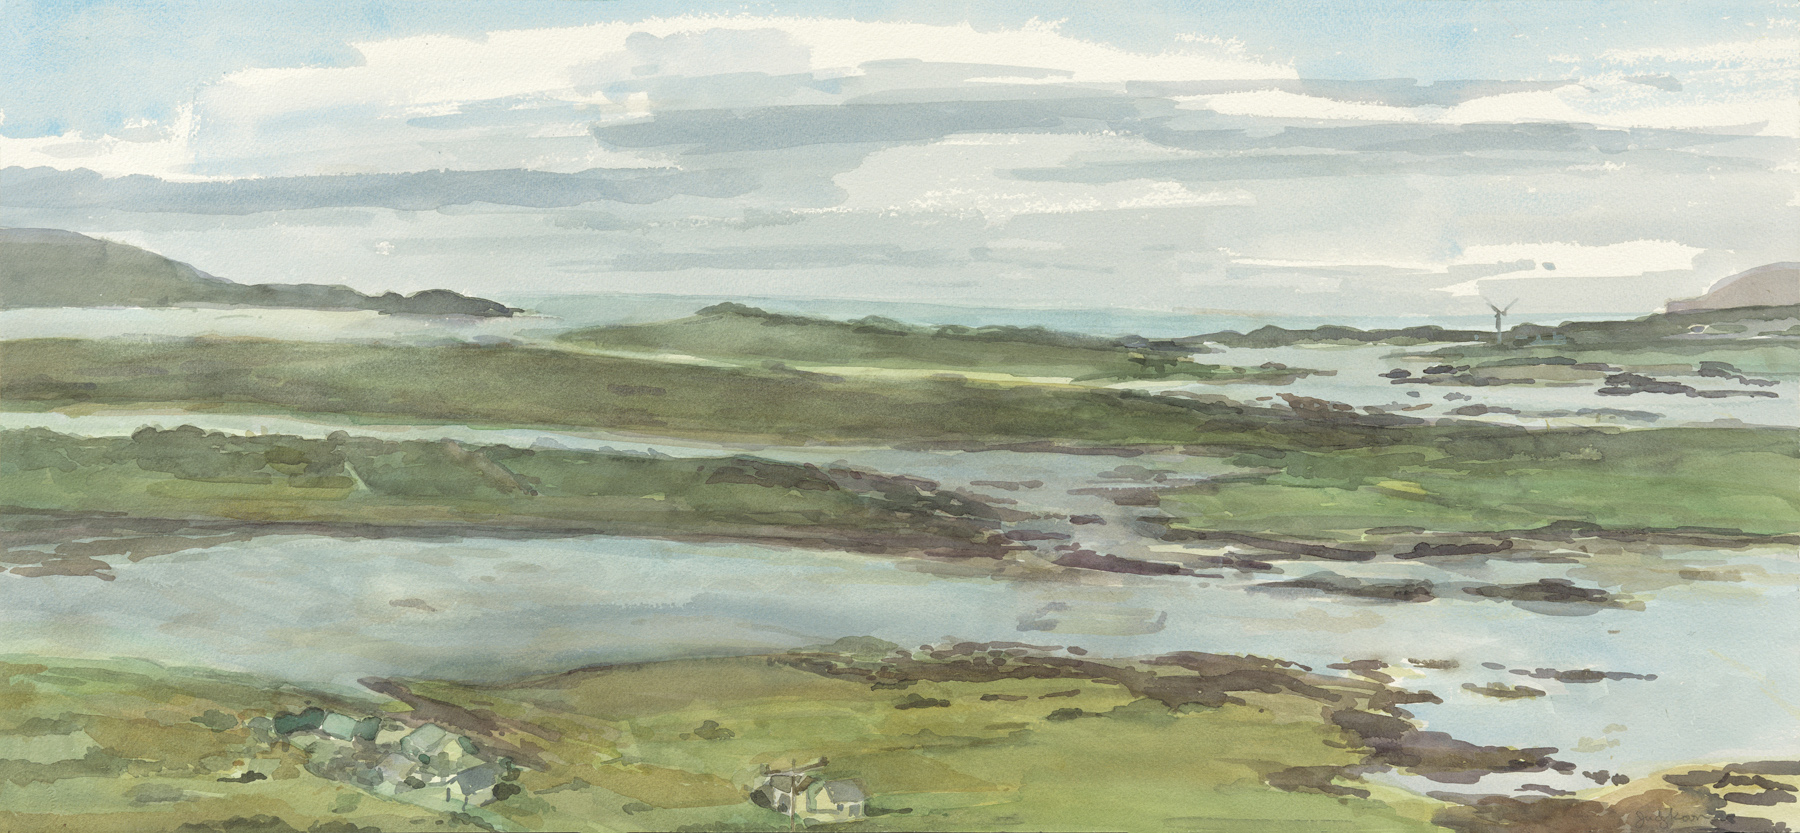   Clearing From Cleendra, Co Donegal,   2017, watercolor on paper, 29.5” x 13.5” 